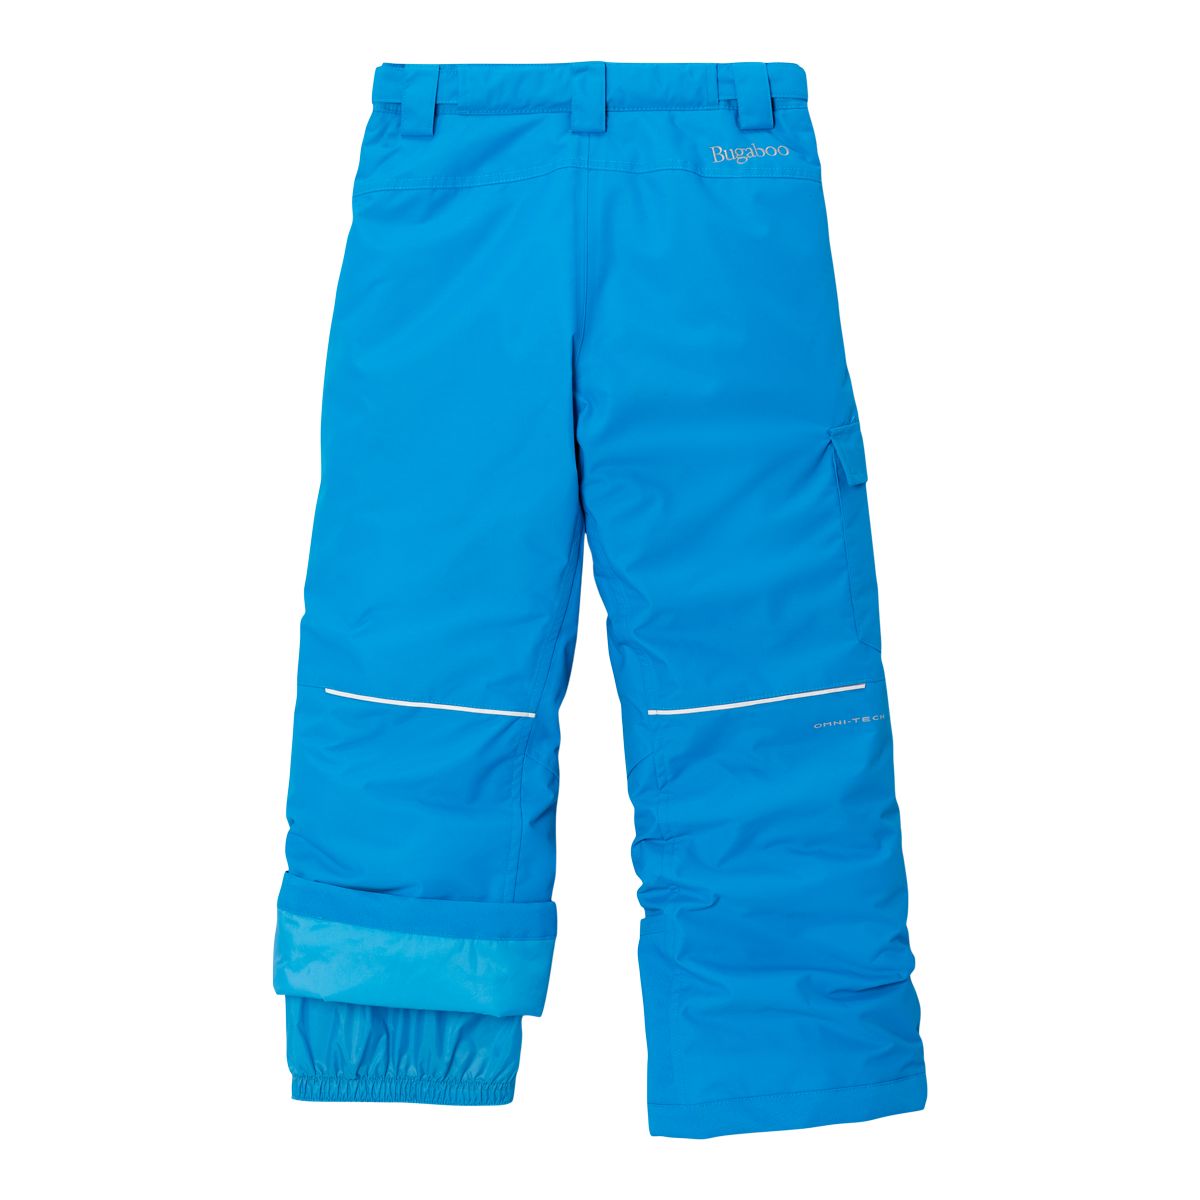 https://media-www.sportchek.ca/product/div-03-softgoods/dpt-76-outerwear/sdpt-03-boys/333861176/columbia-kids-bugaboo-ii-snow-pants-boys-winter-ski-waterproof-insulated-27e06717-3be8-4f46-8bde-4129f91ce6d4-jpgrendition.jpg?imdensity=1&imwidth=1244&impolicy=mZoom